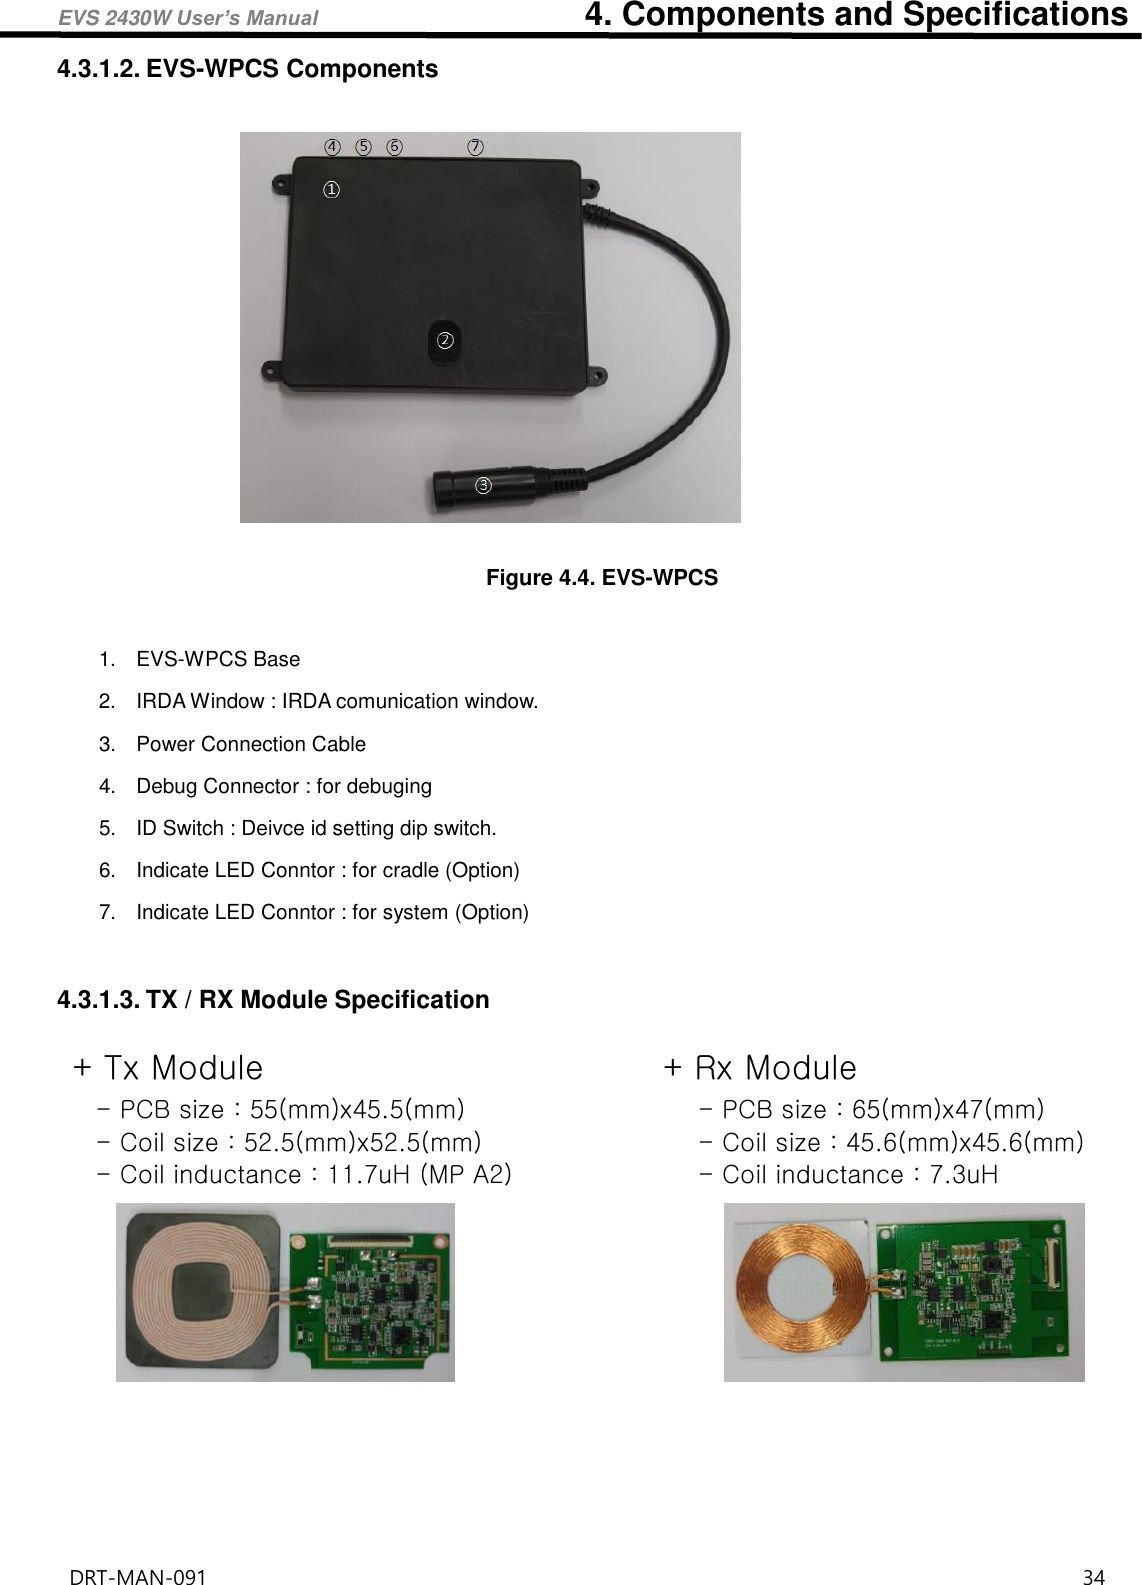 EVS 2430W User’s Manual                                4. Components and Specifications DRT-MAN-091                                                                                    34  4.3.1.2. EVS-WPCS Components   Figure 4.4. EVS-WPCS  1.  EVS-WPCS Base   2.  IRDA Window : IRDA comunication window. 3.  Power Connection Cable 4.  Debug Connector : for debuging 5.  ID Switch : Deivce id setting dip switch. 6.  Indicate LED Conntor : for cradle (Option) 7.  Indicate LED Conntor : for system (Option)  4.3.1.3. TX / RX Module Specification      + Tx Module - PCB size : 55(mm)x45.5(mm) - Coil size : 52.5(mm)x52.5(mm) - Coil inductance : 11.7uH (MP A2) + Rx Module - PCB size : 65(mm)x47(mm) - Coil size : 45.6(mm)x45.6(mm) - Coil inductance : 7.3uH 